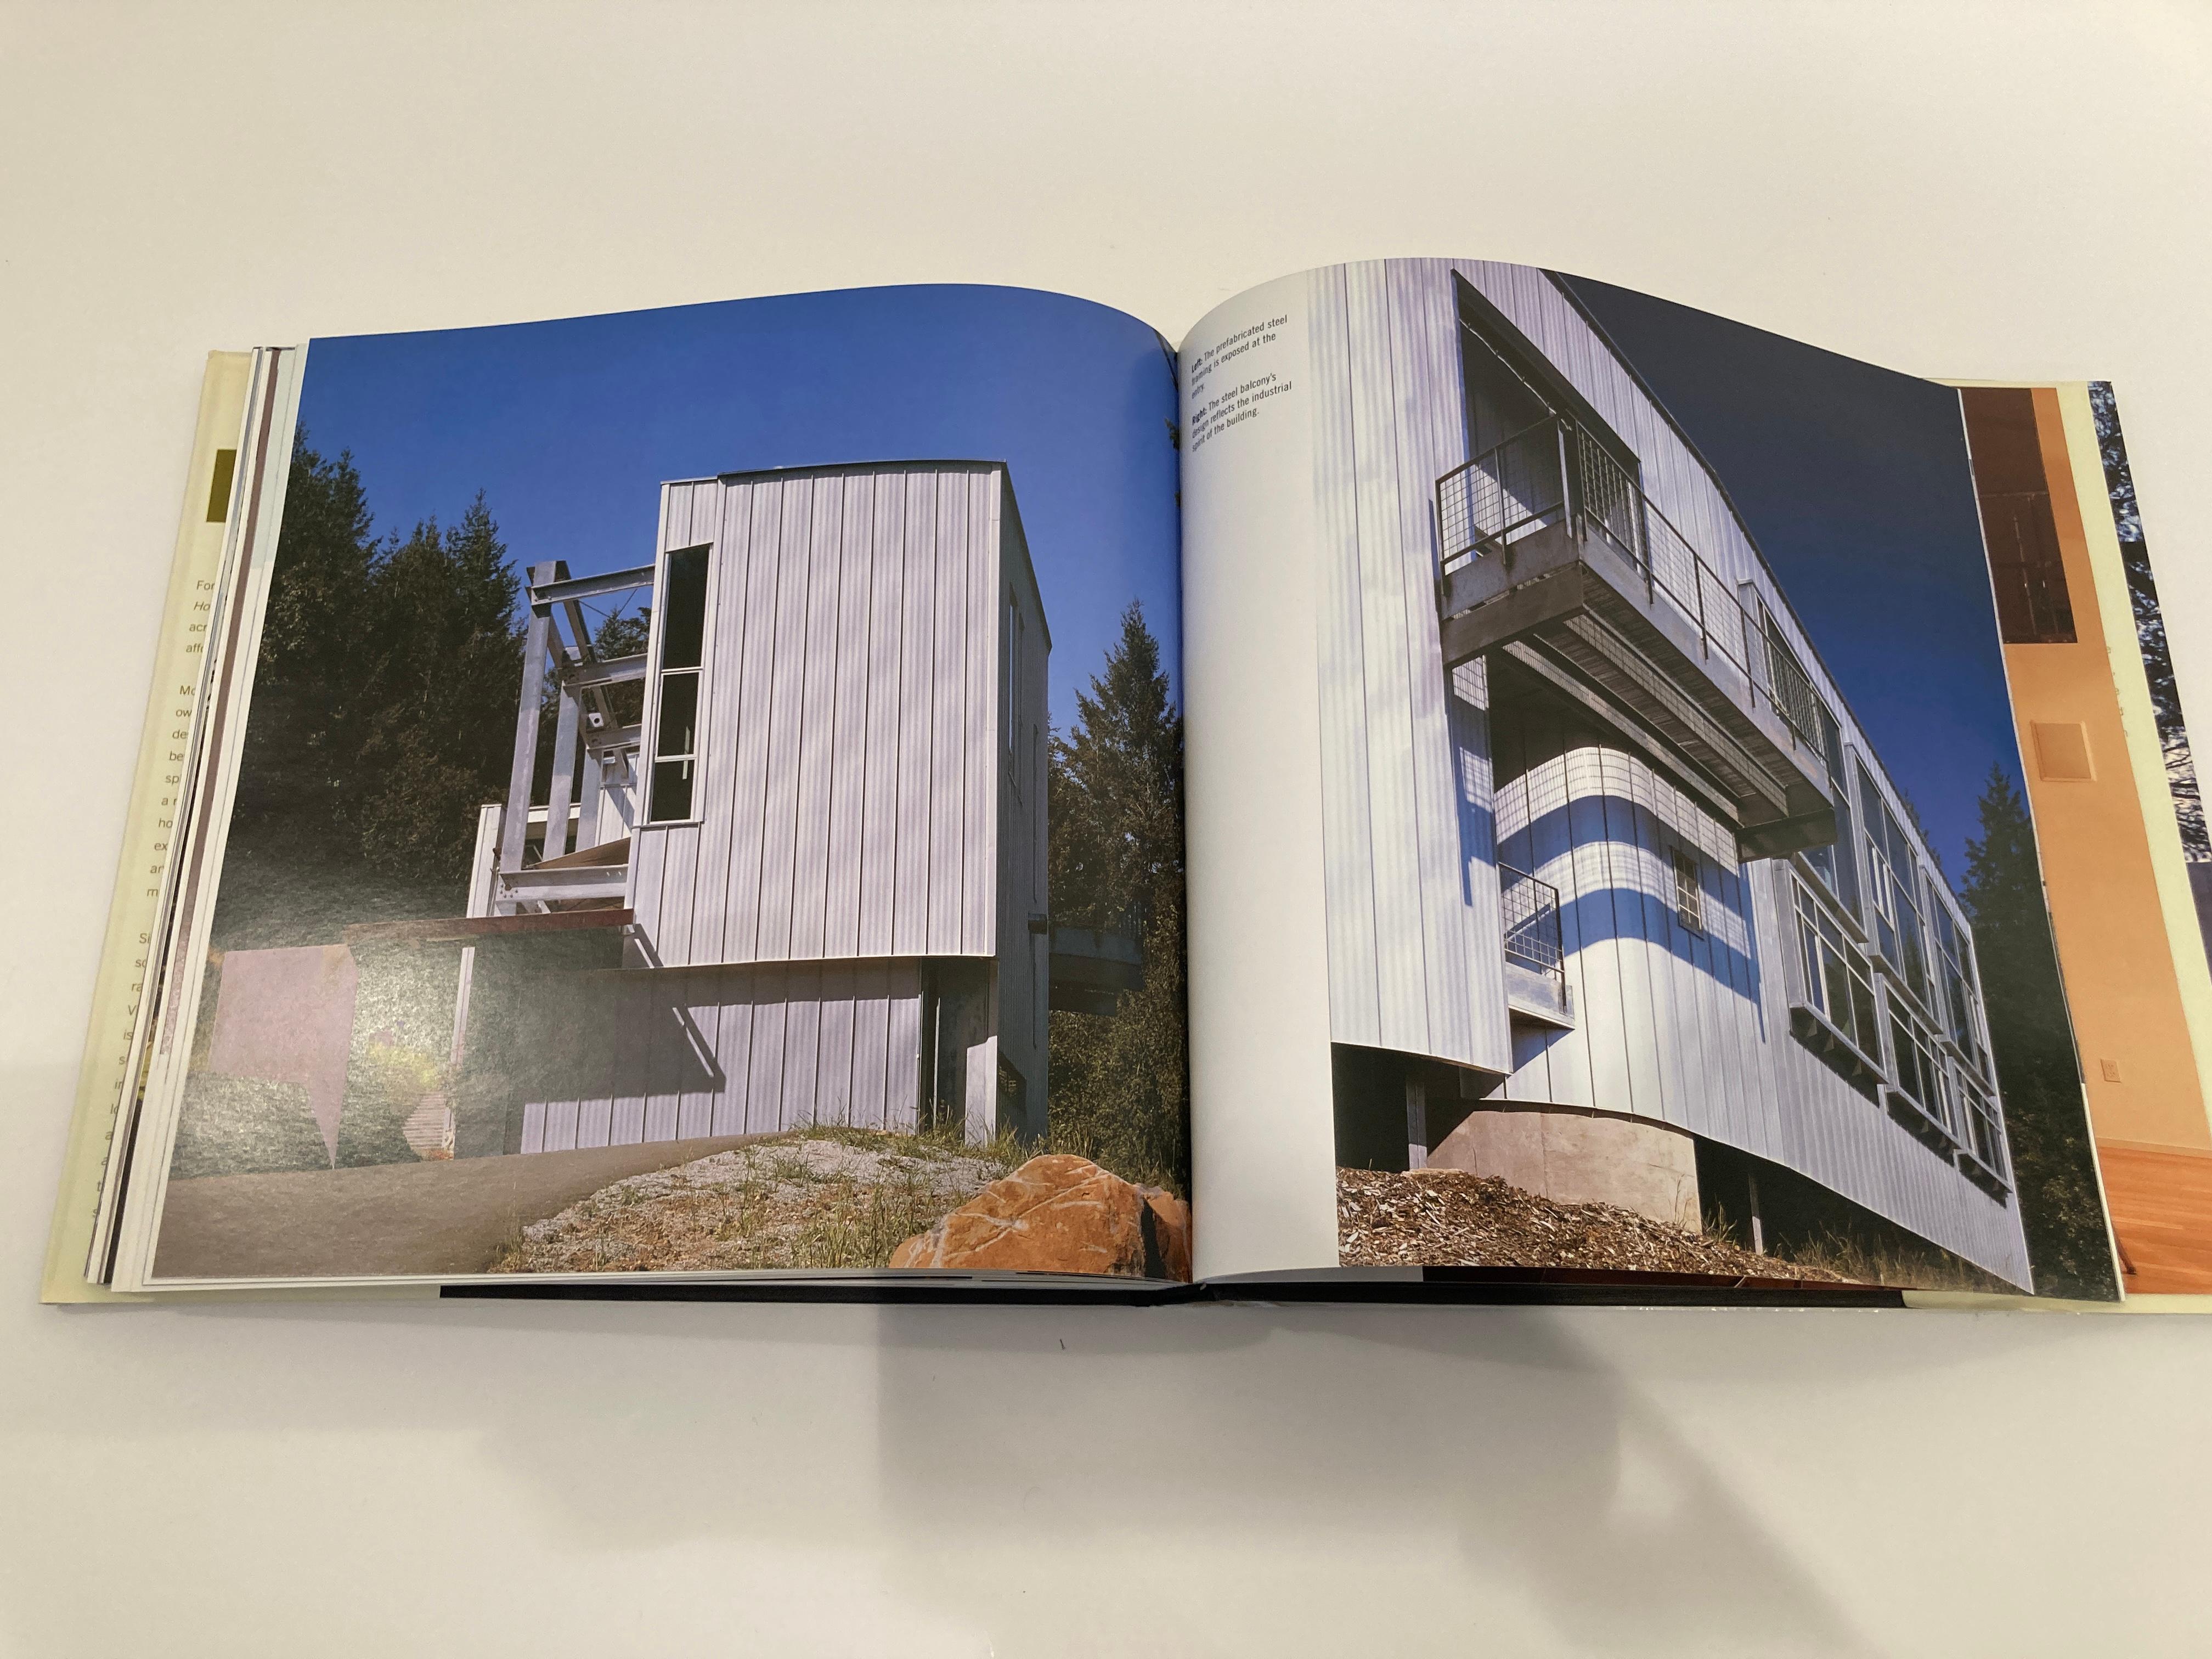 Organic Modern Great Houses on a Budget by Trulove, James Grayson Hardcover Book For Sale